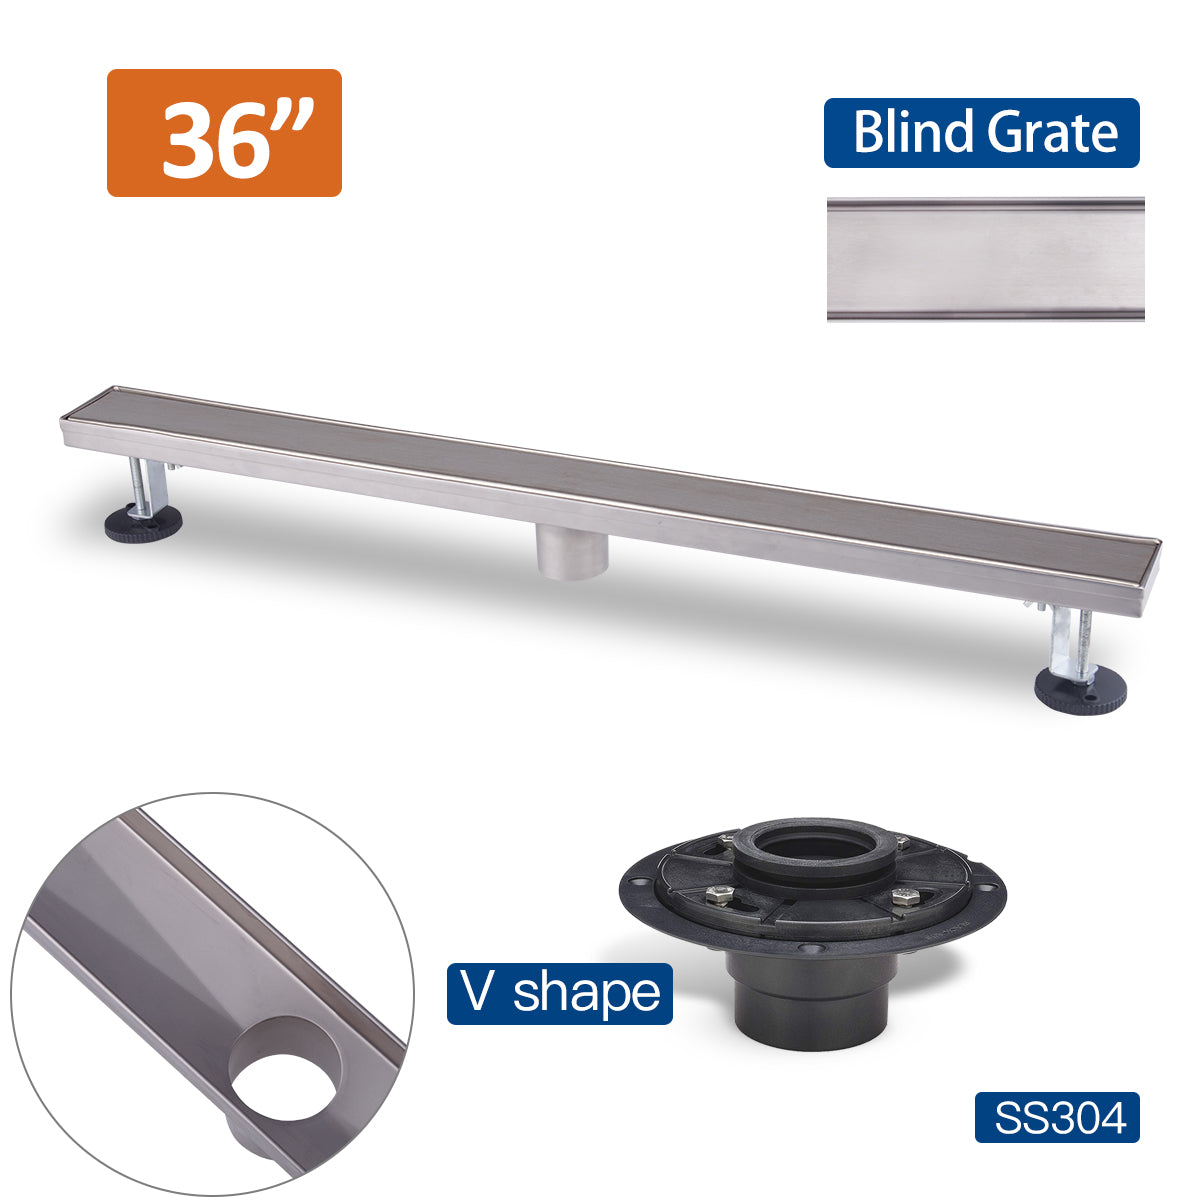 36 Inch Stainless Steel Linear Floor Drain Blind Style and Drain Base with Rubber Gasket